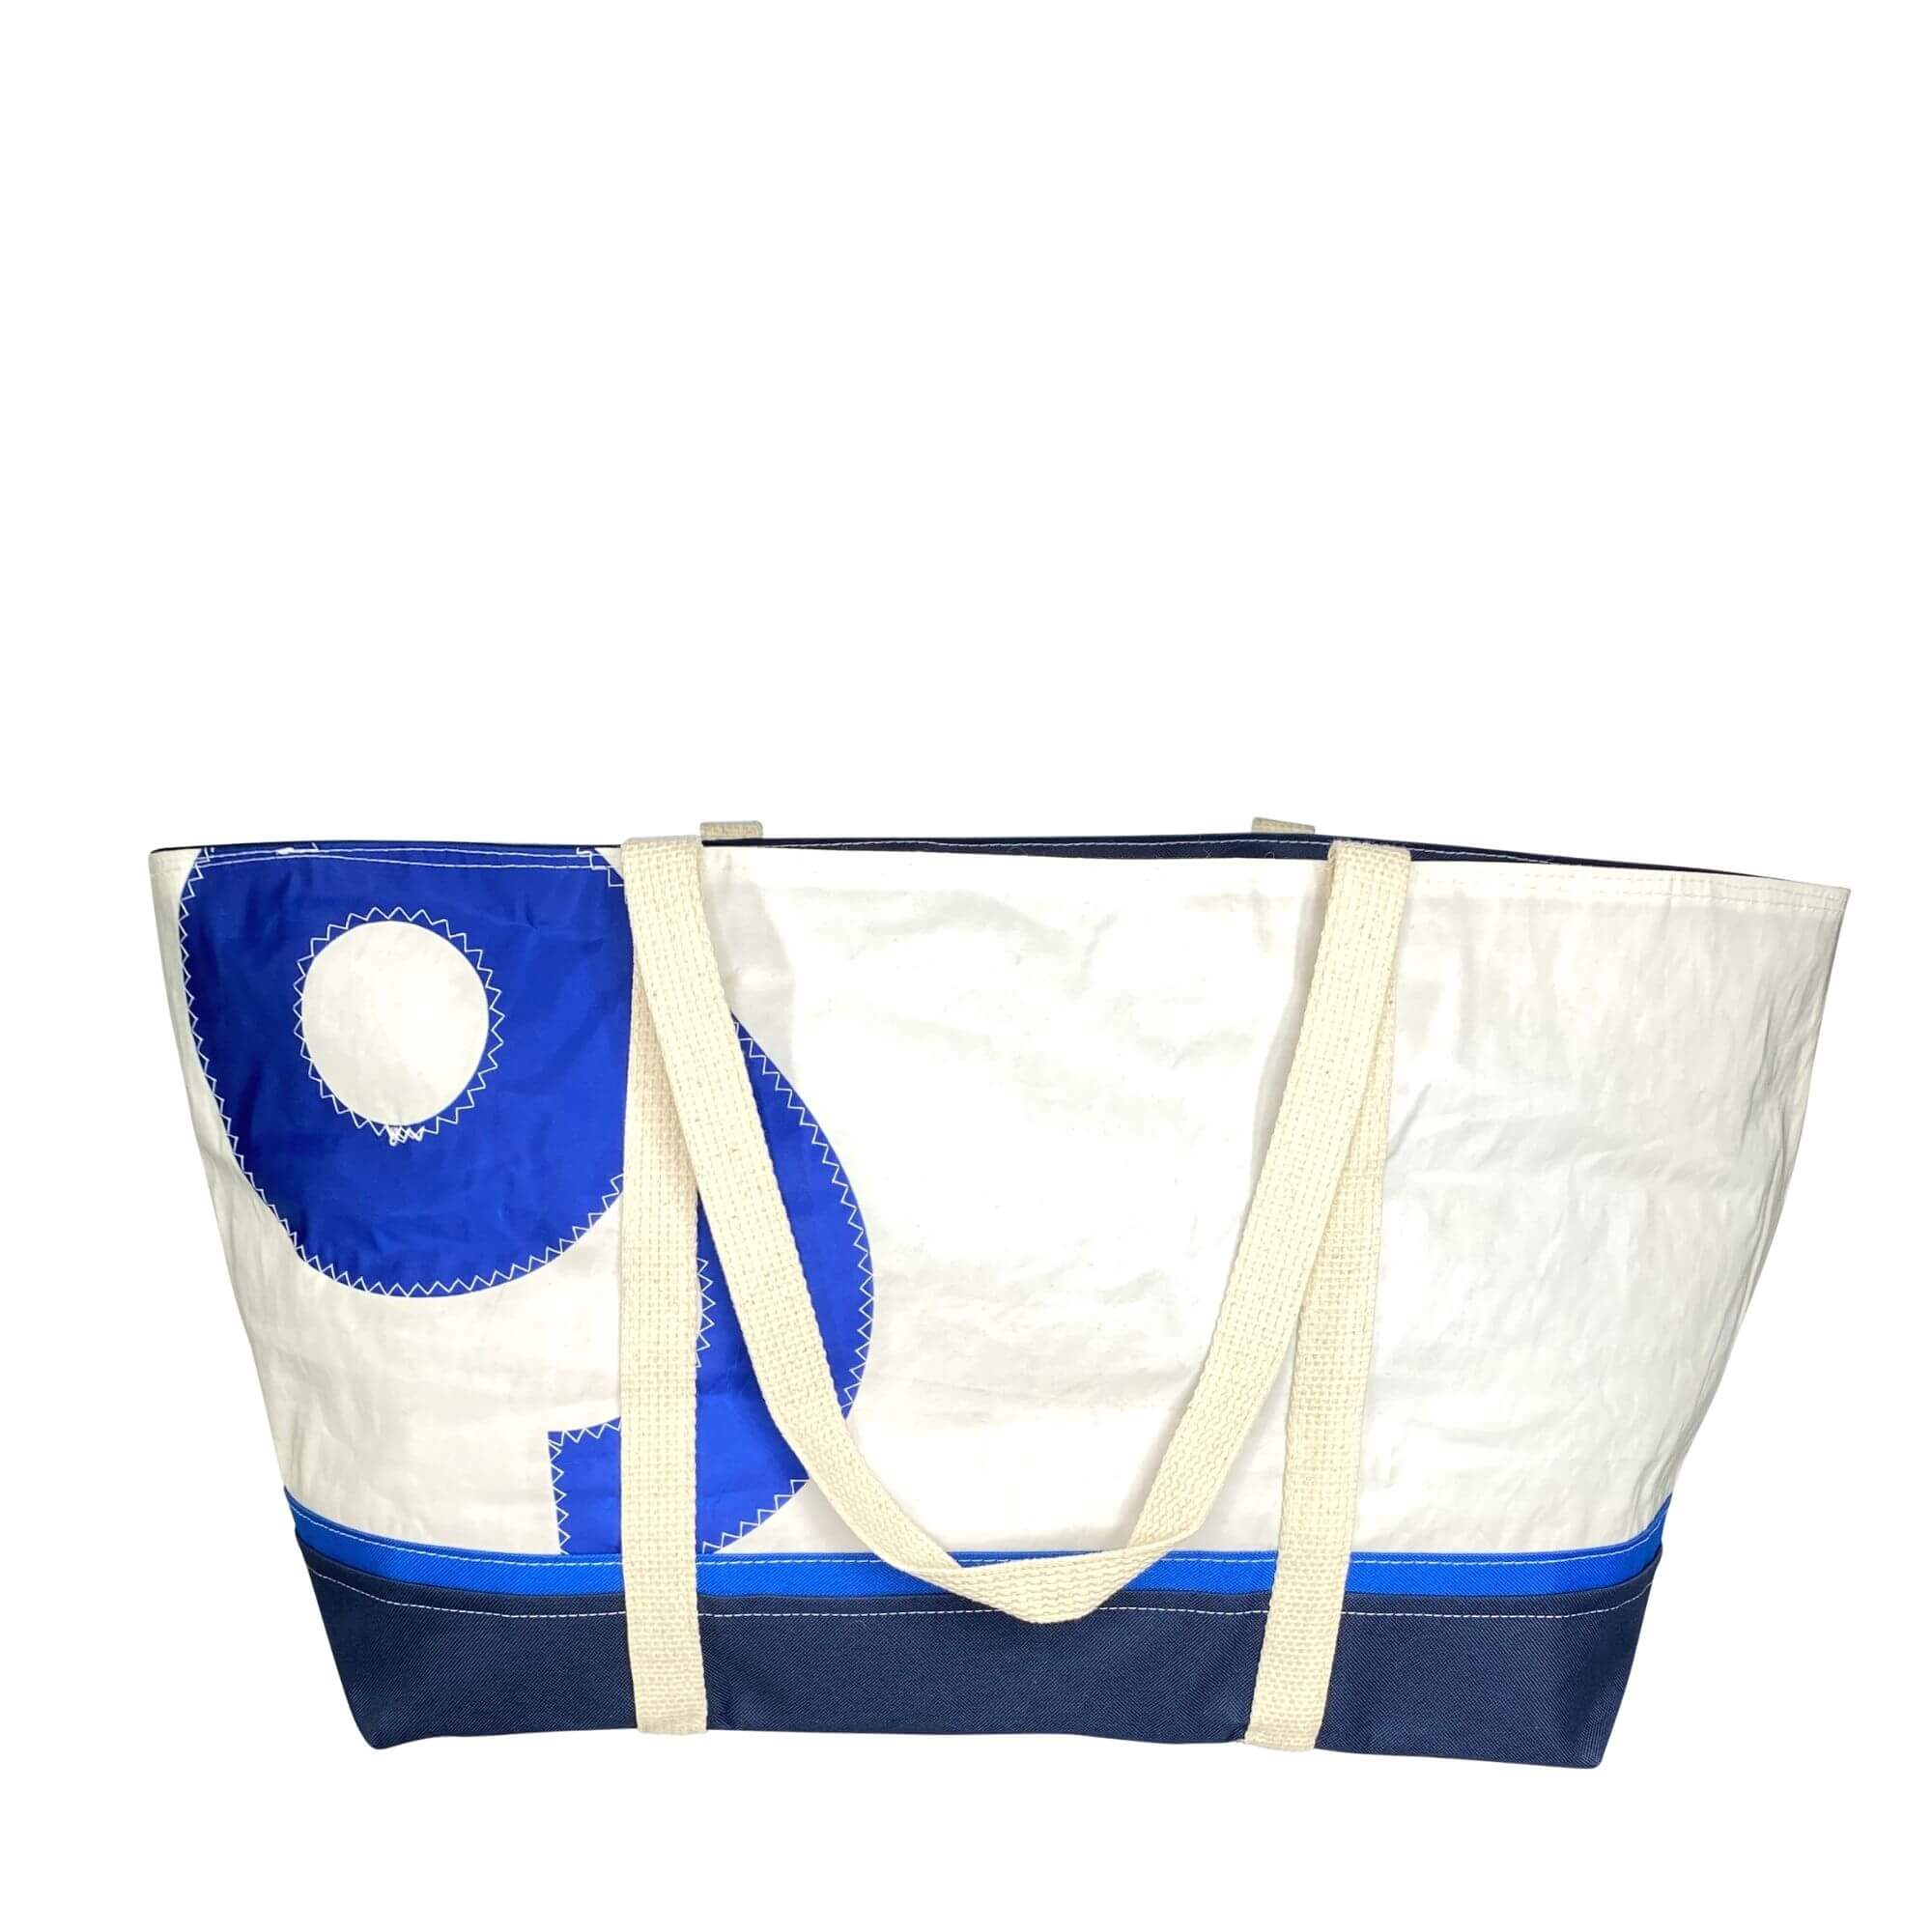  Sea Bags Recycled Sail Cloth Yellow Pier Tote Bag